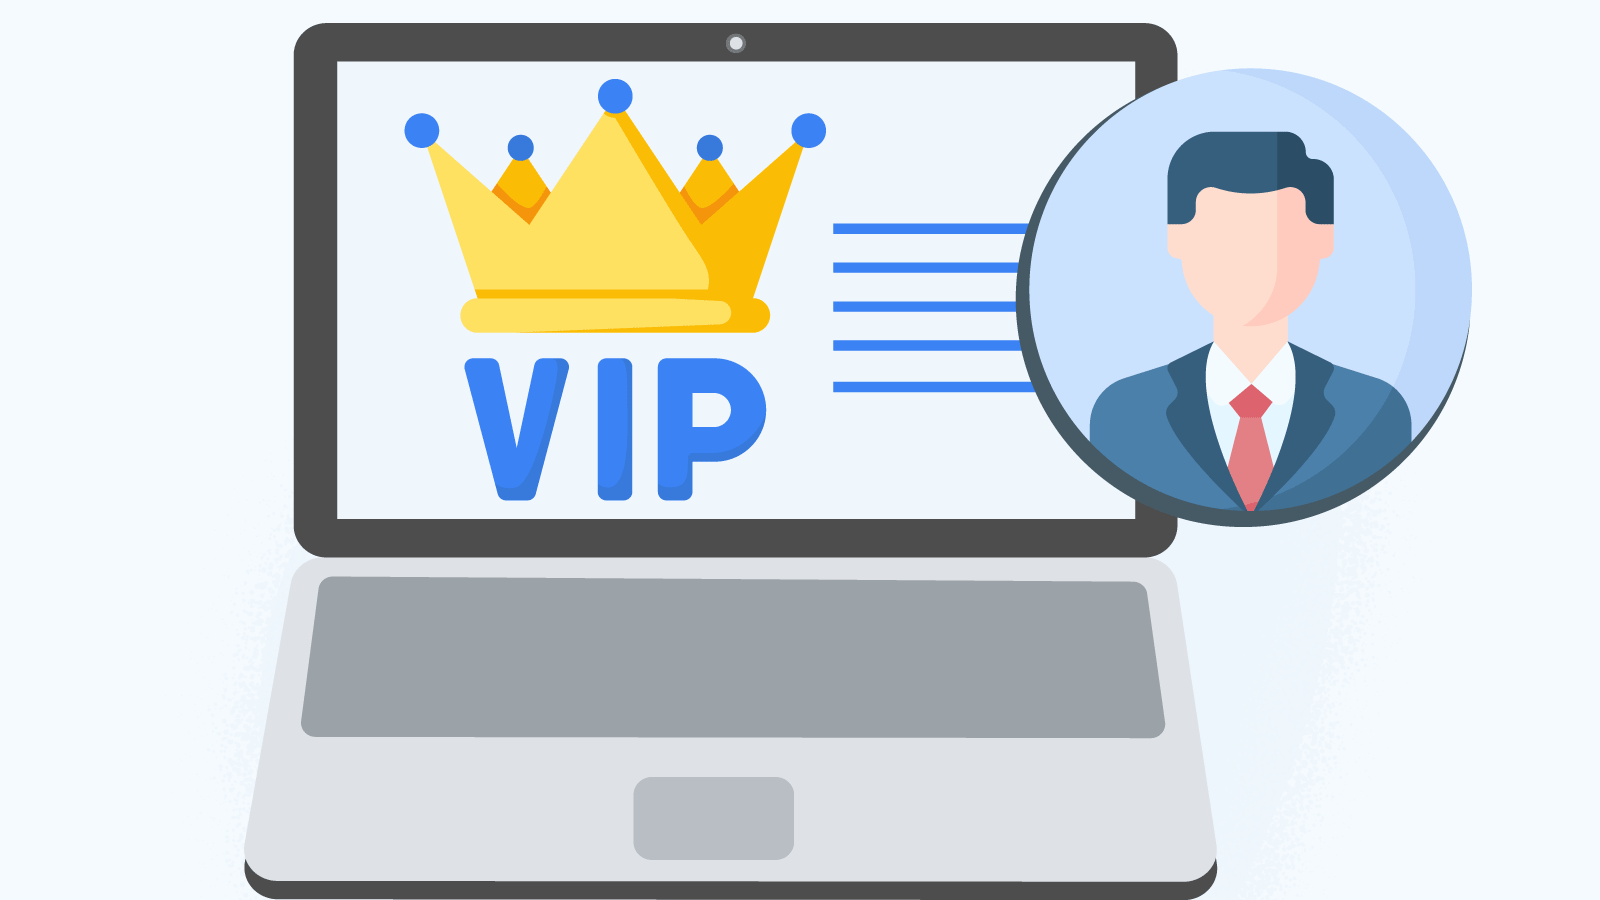 Where do casino VIP account managers fit in